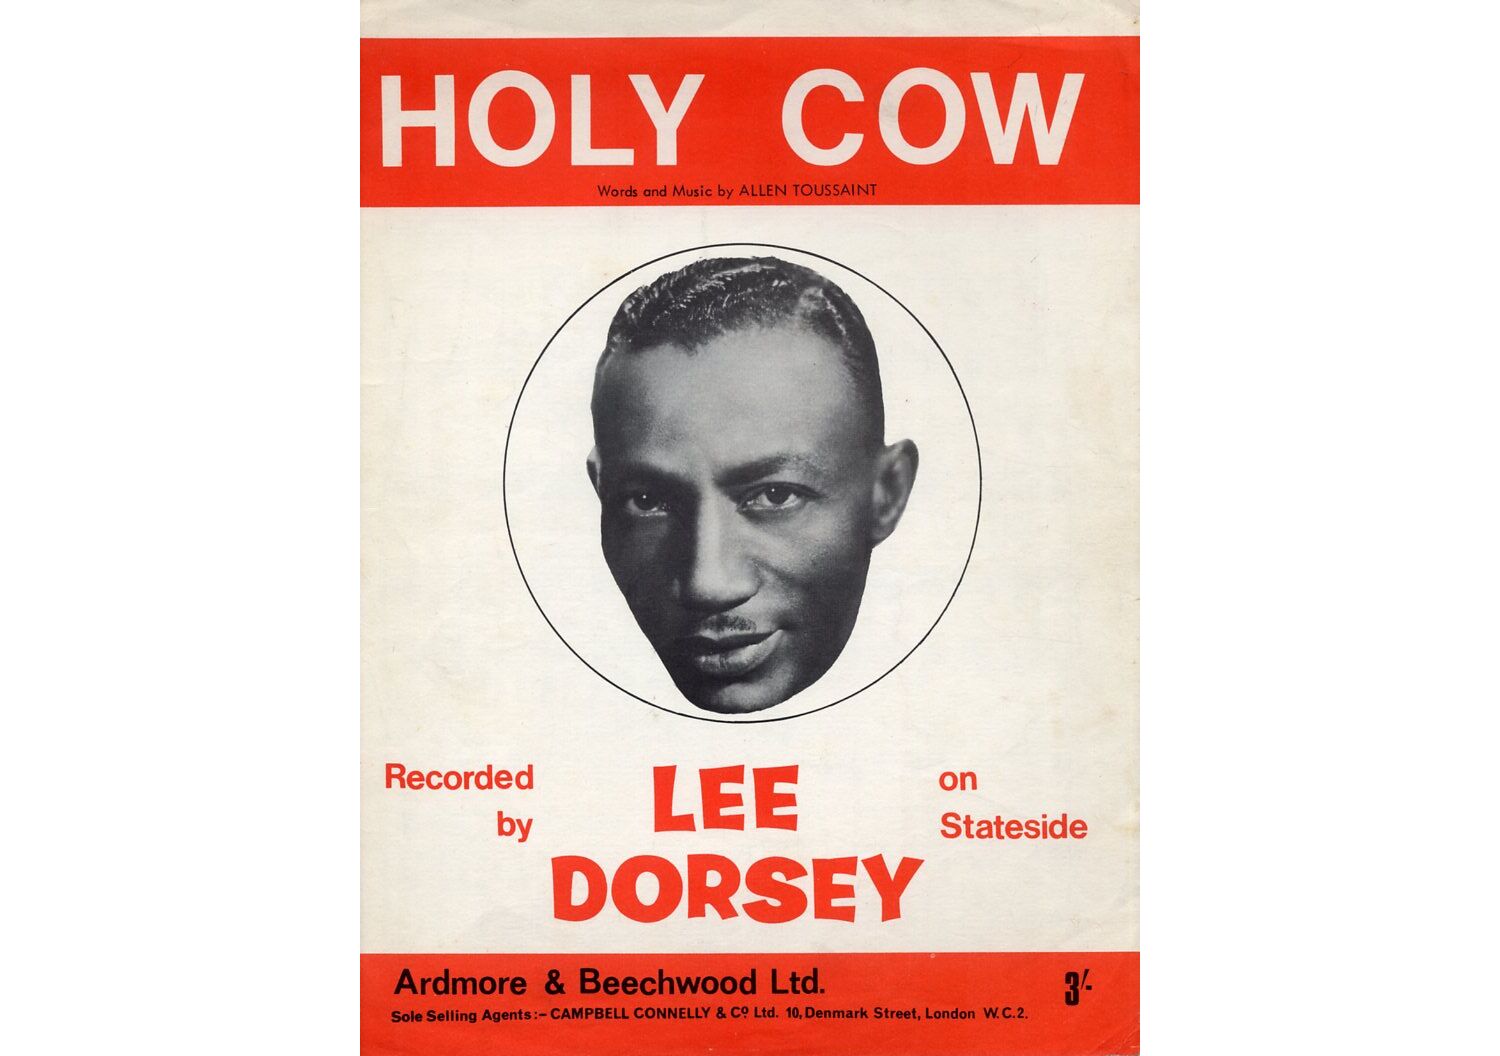 Holy Cow - Featuring Lee Dorsey only £